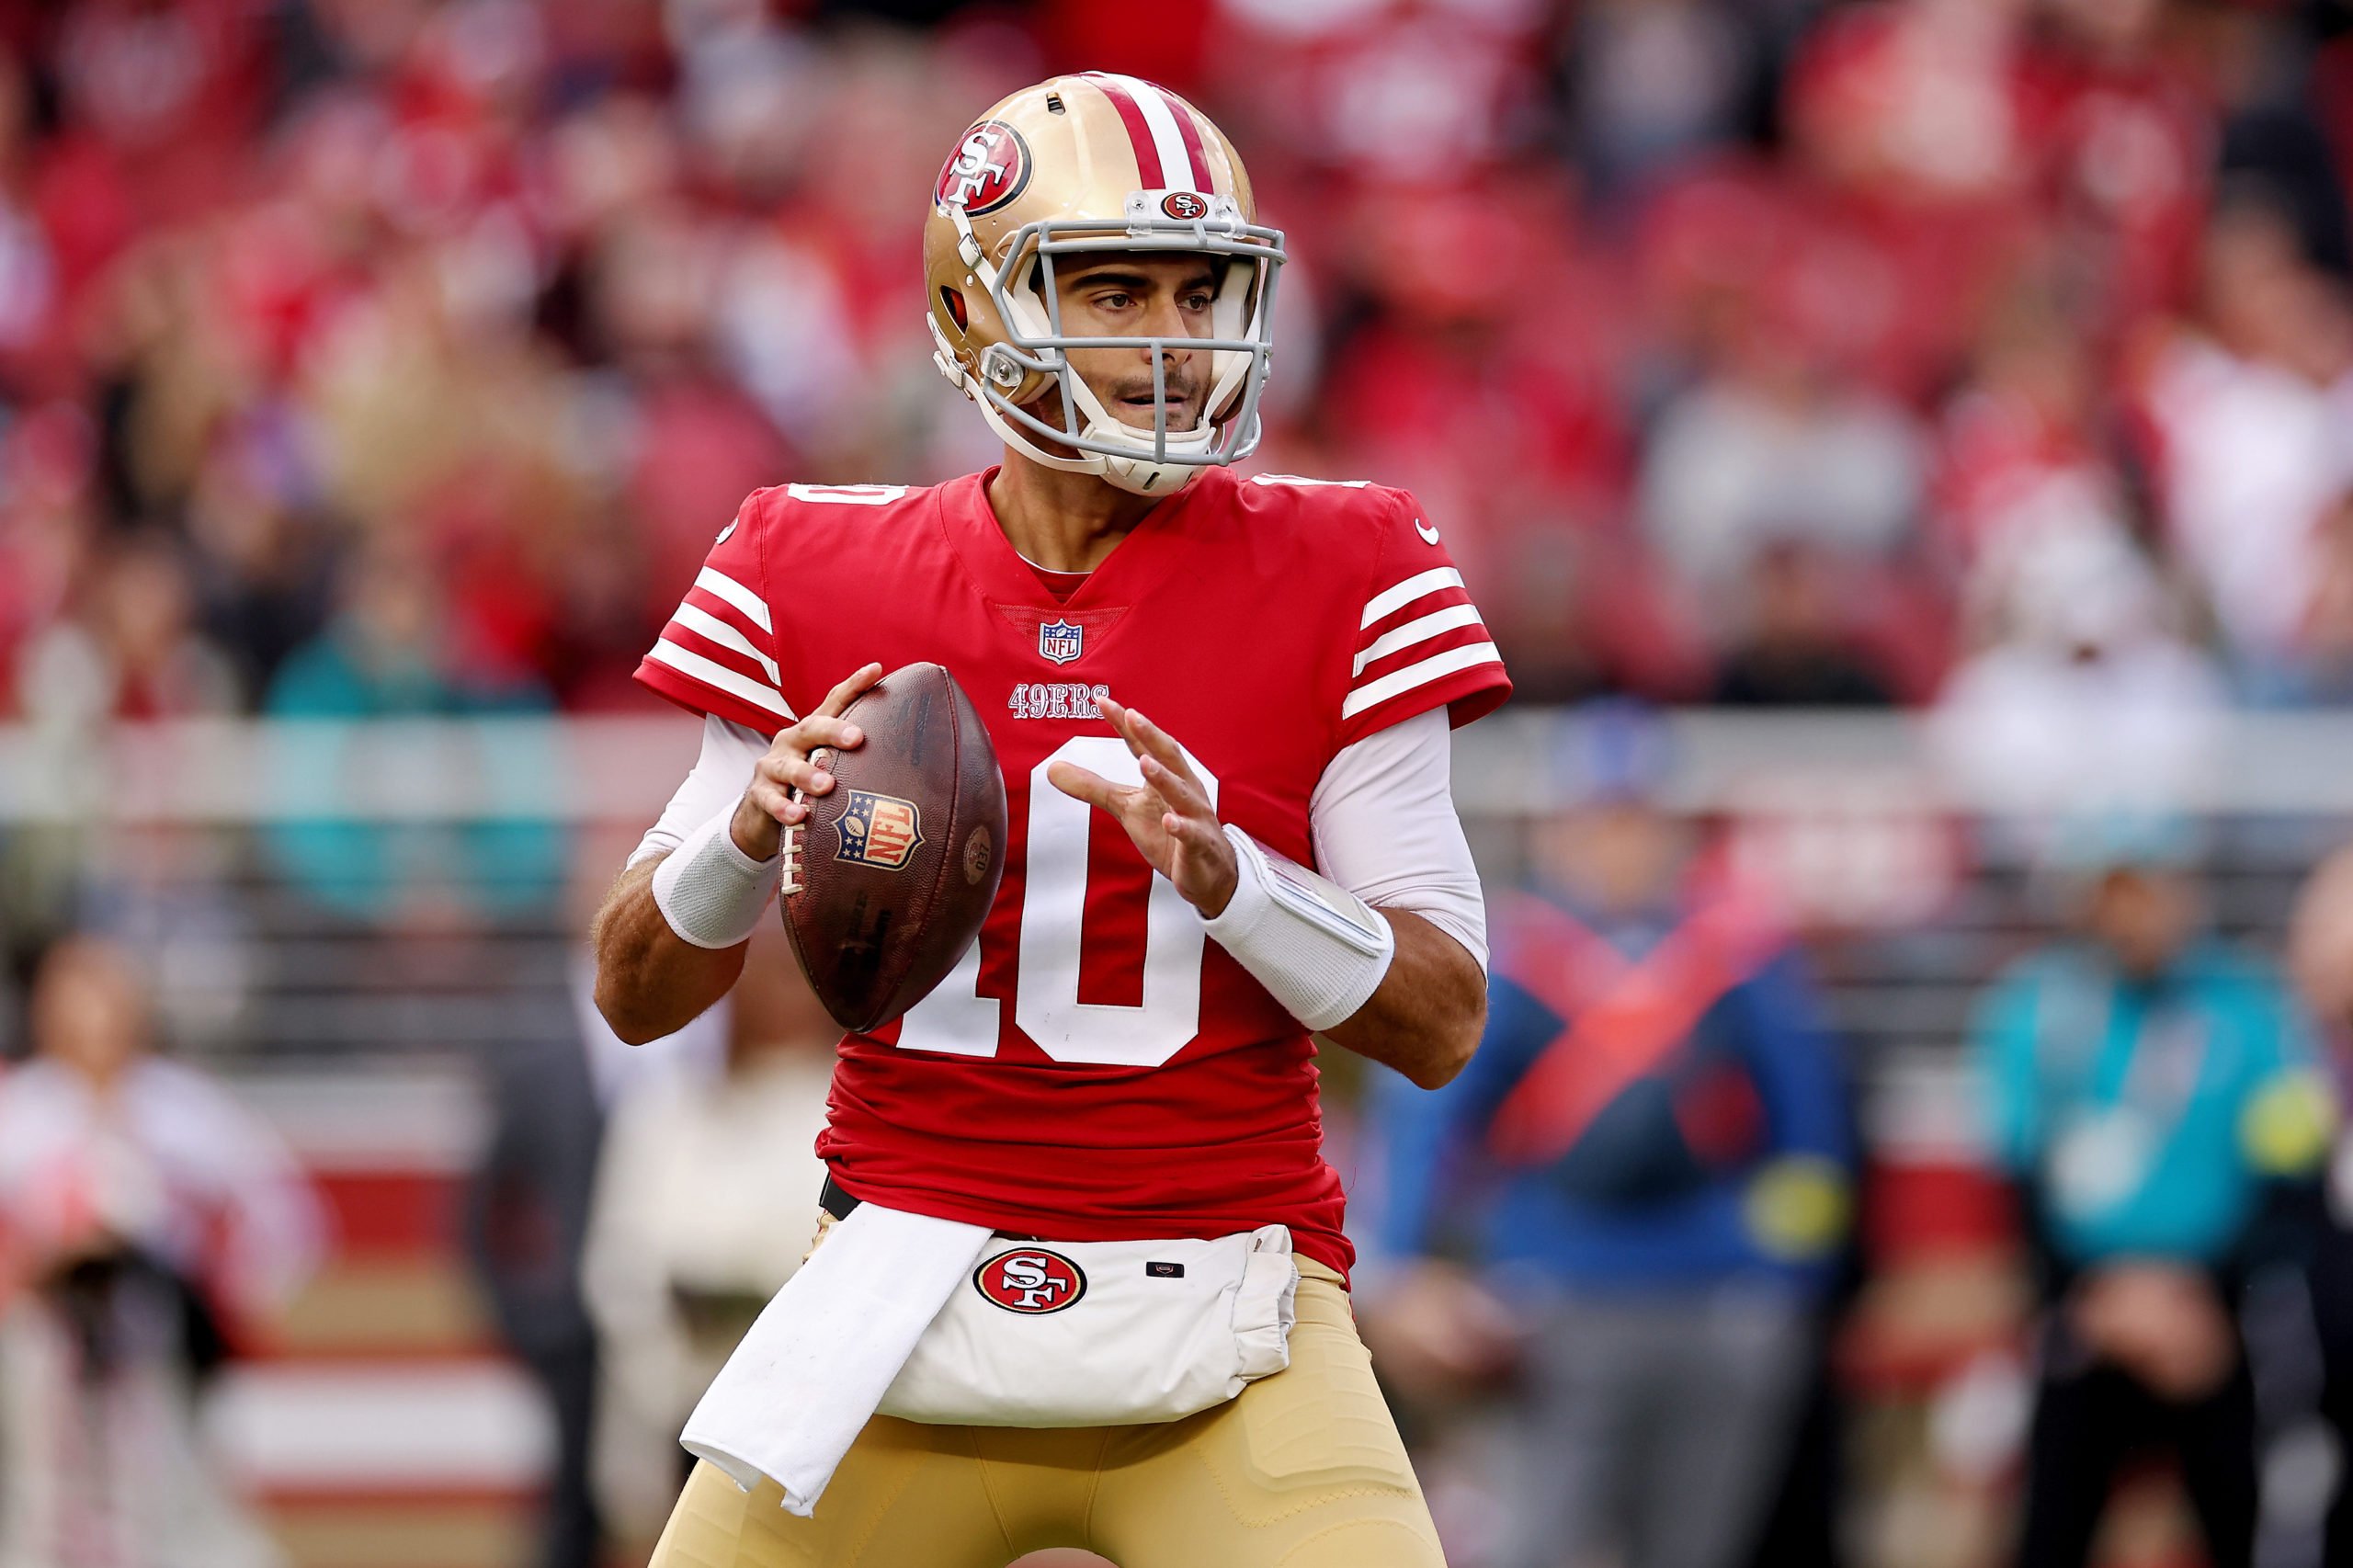 SANTA CLARA, CALIFORNIA - DECEMBER 04: Jimmy Garoppolo #10 of the San Francisco 49ers attempts a pass during the first quarter against the Miami Dolphins at Levi's Stadium on December 04, 2022 in Santa Clara, California. Ezra Shaw/Getty Images